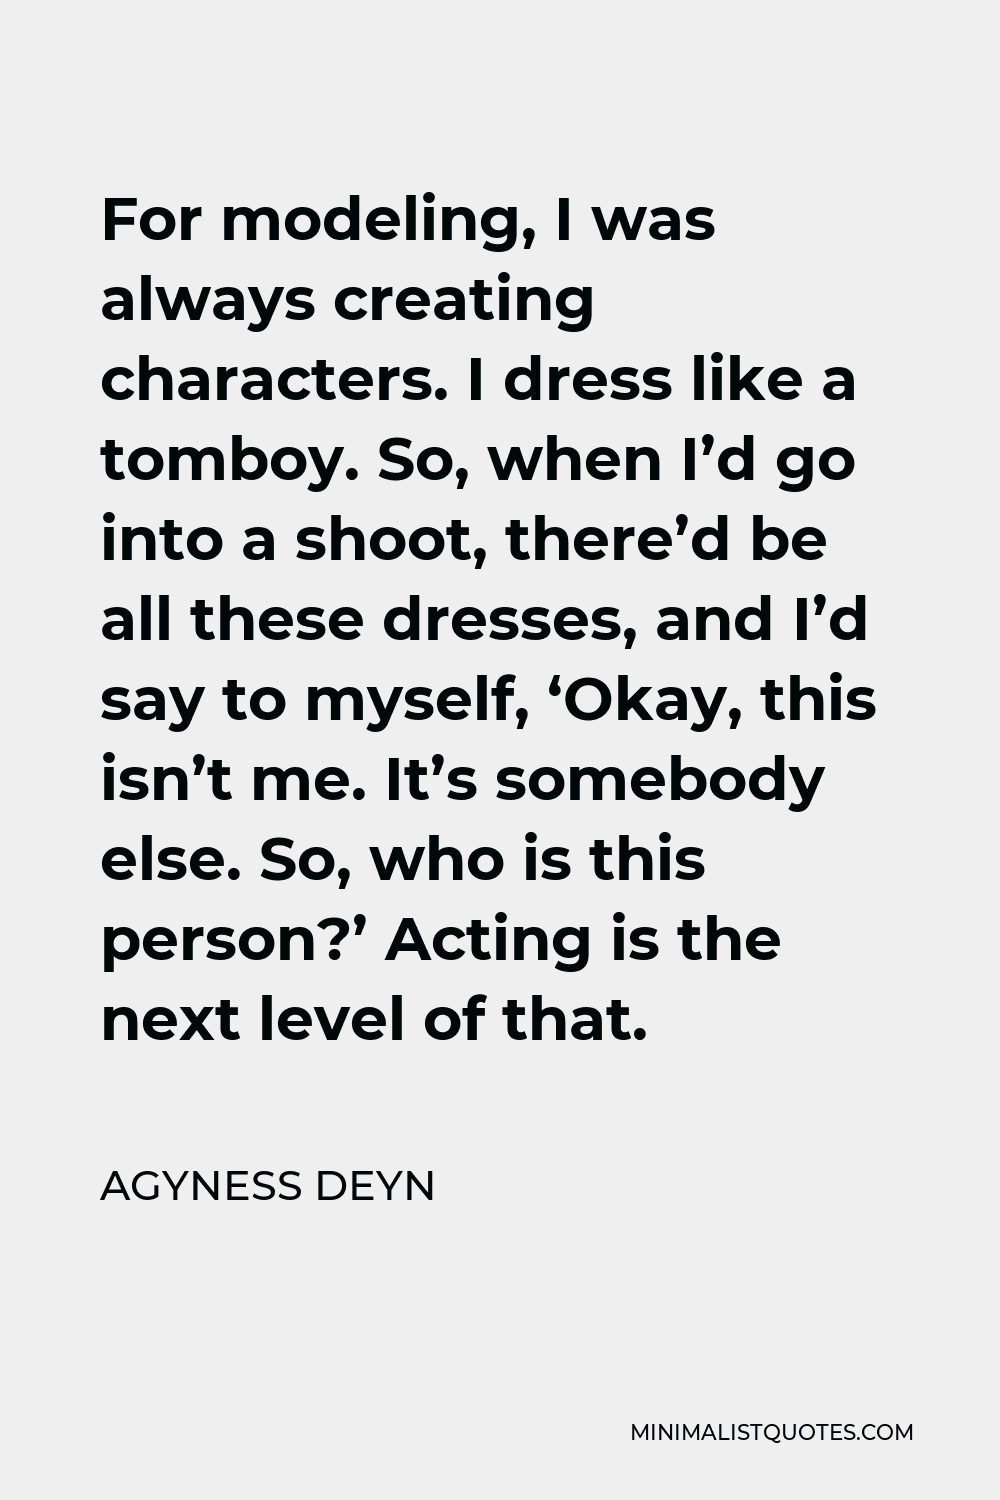 Agyness Deyn Quote - For modeling, I was always creating characters. I dress like a tomboy. So, when I’d go into a shoot, there’d be all these dresses, and I’d say to myself, ‘Okay, this isn’t me. It’s somebody else. So, who is this person?’ Acting is the next level of that.